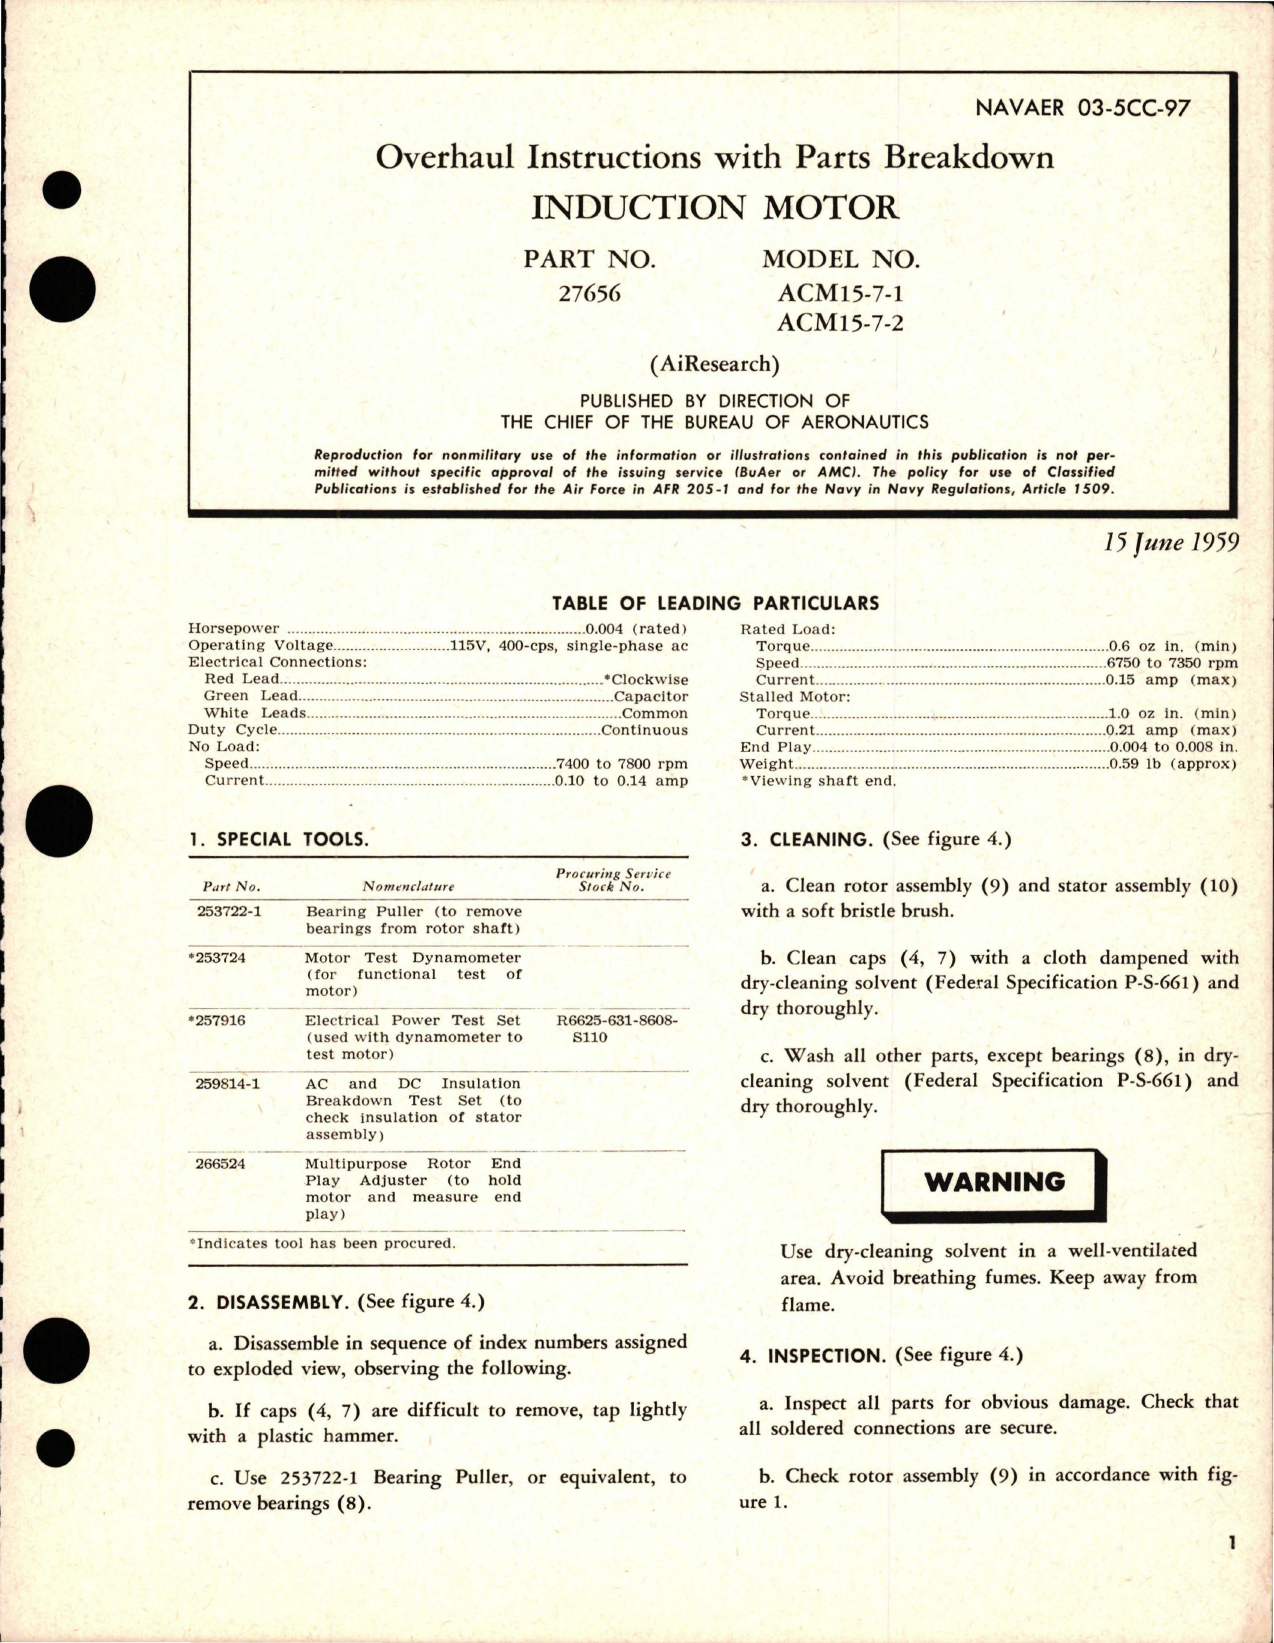 Sample page 1 from AirCorps Library document: Overhaul Instructions with Parts Breakdown for Induction Motor - Part 27656 - Models ACM15-7-1 and ACM15-7-2